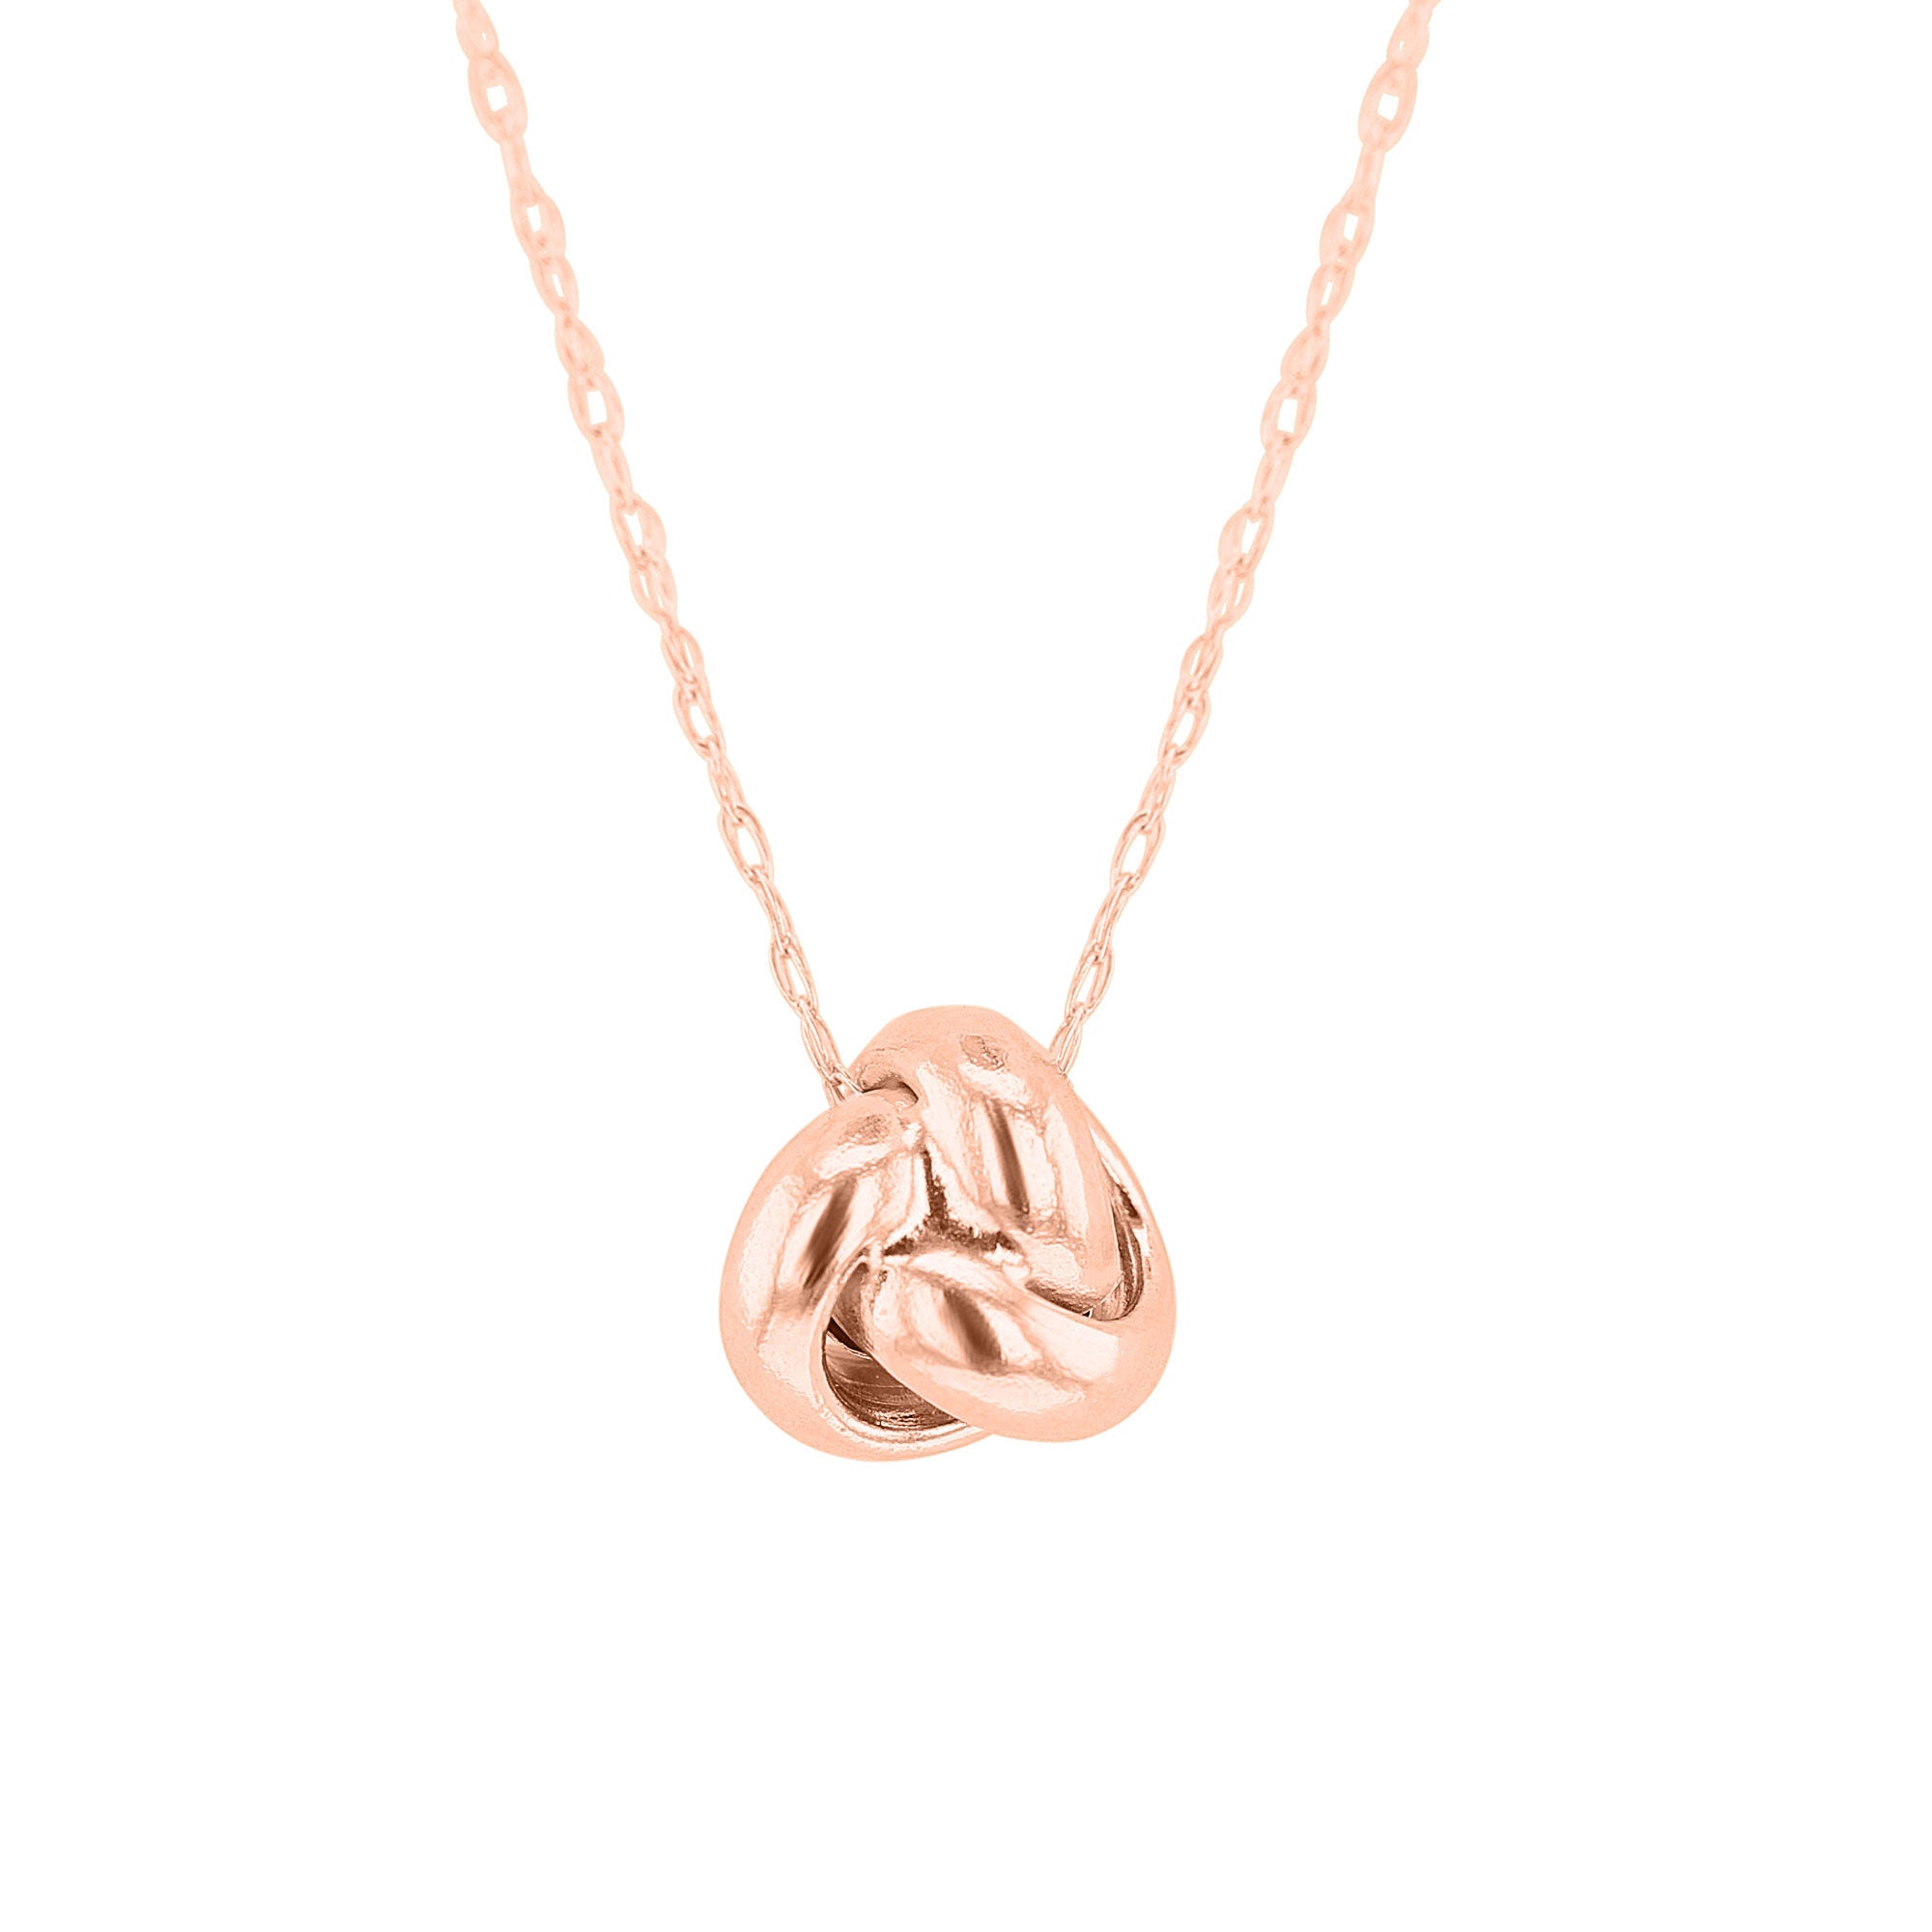 Bloomingdale's 14K Yellow Gold Love Knot Necklace, 18